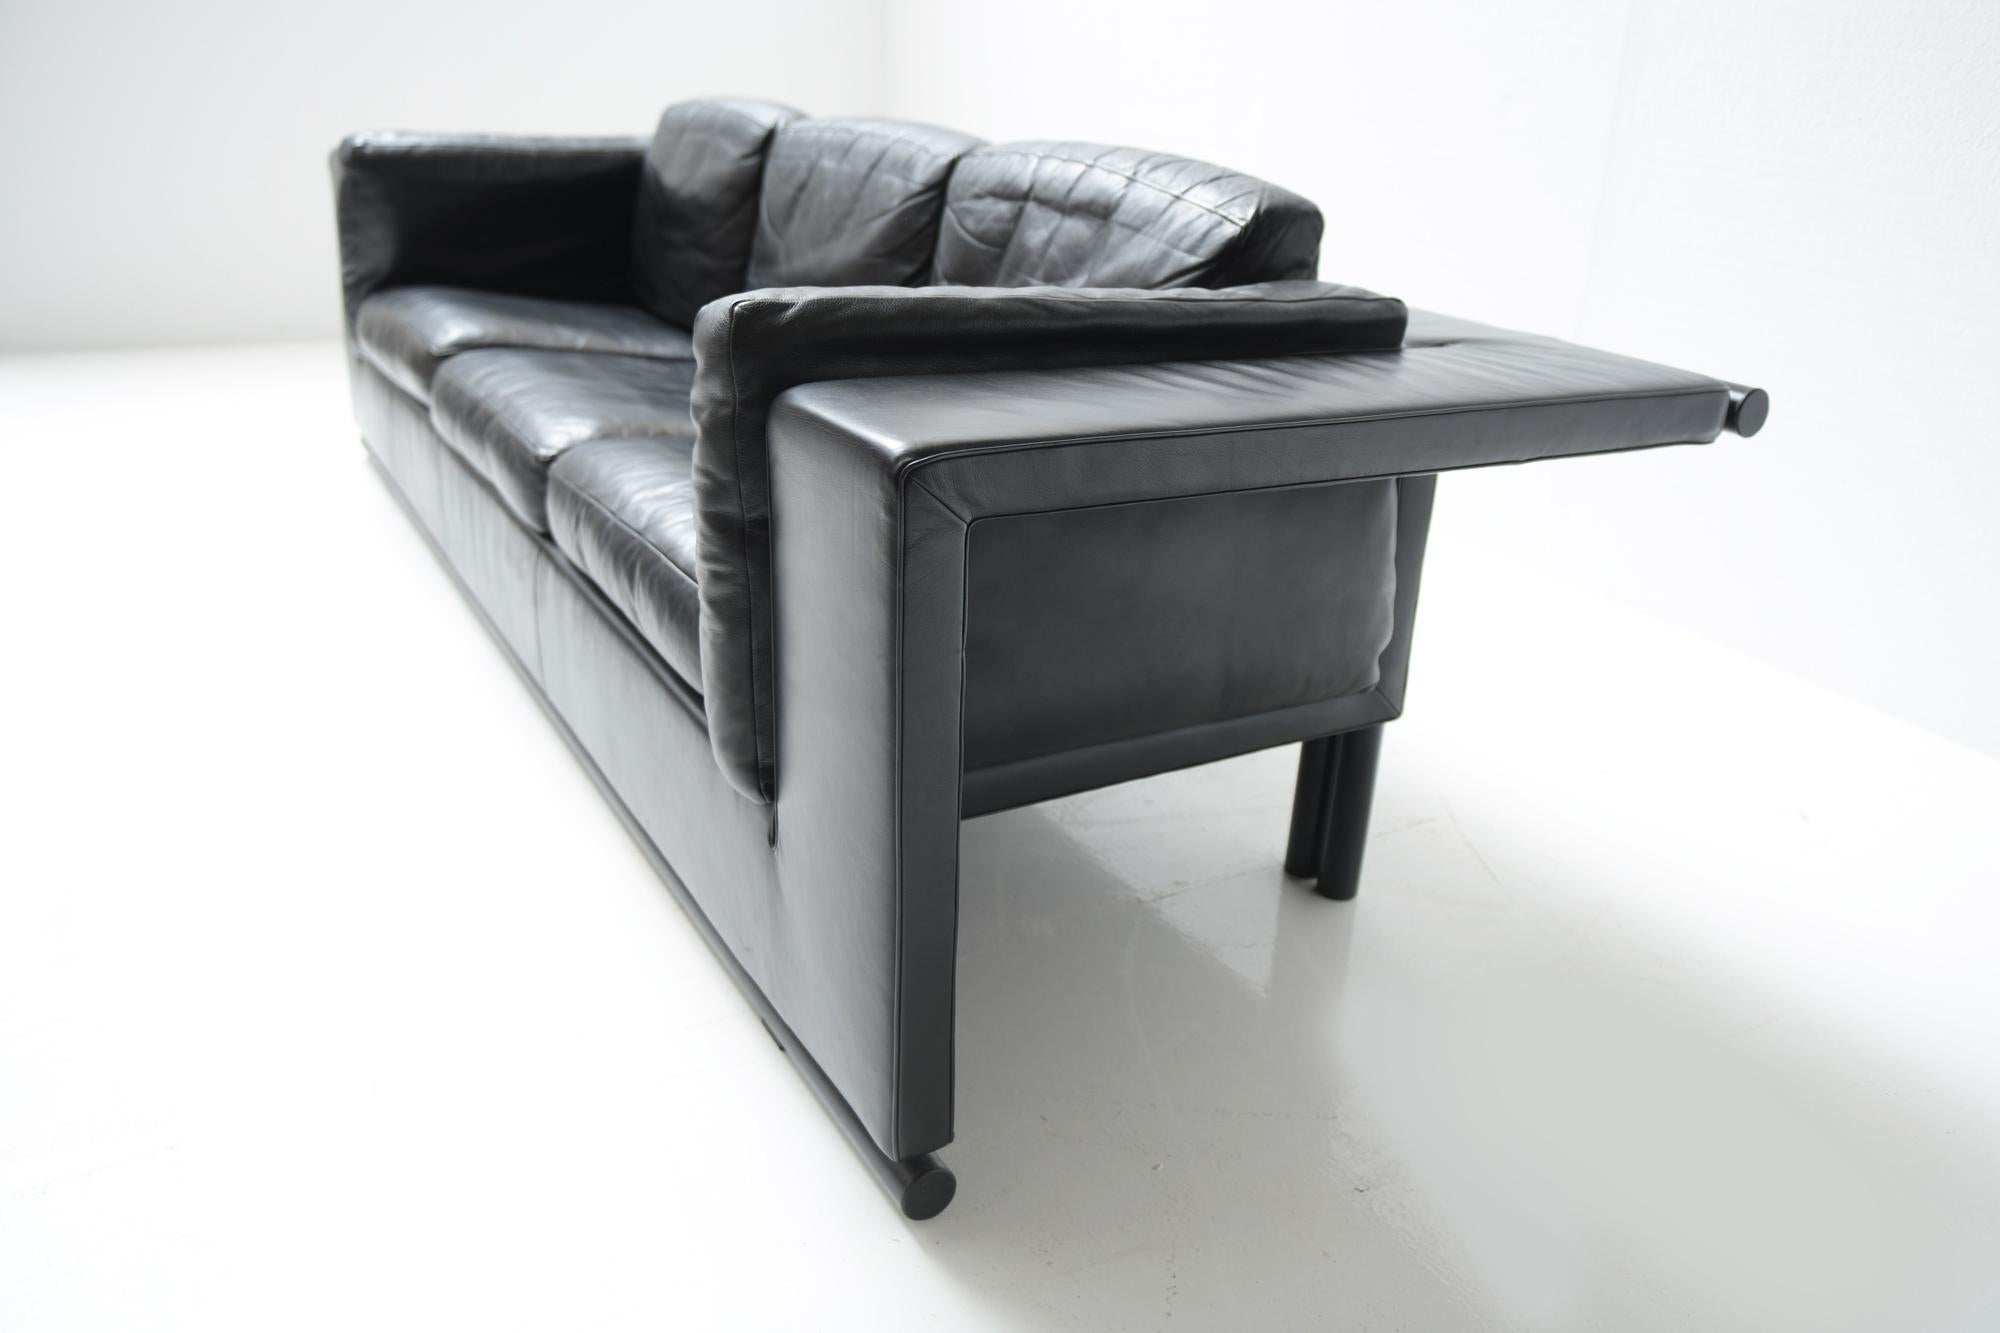 Leather Extremely Rare Vintage Sofa by Paolo Piva for De Sede Swiss 1970s For Sale